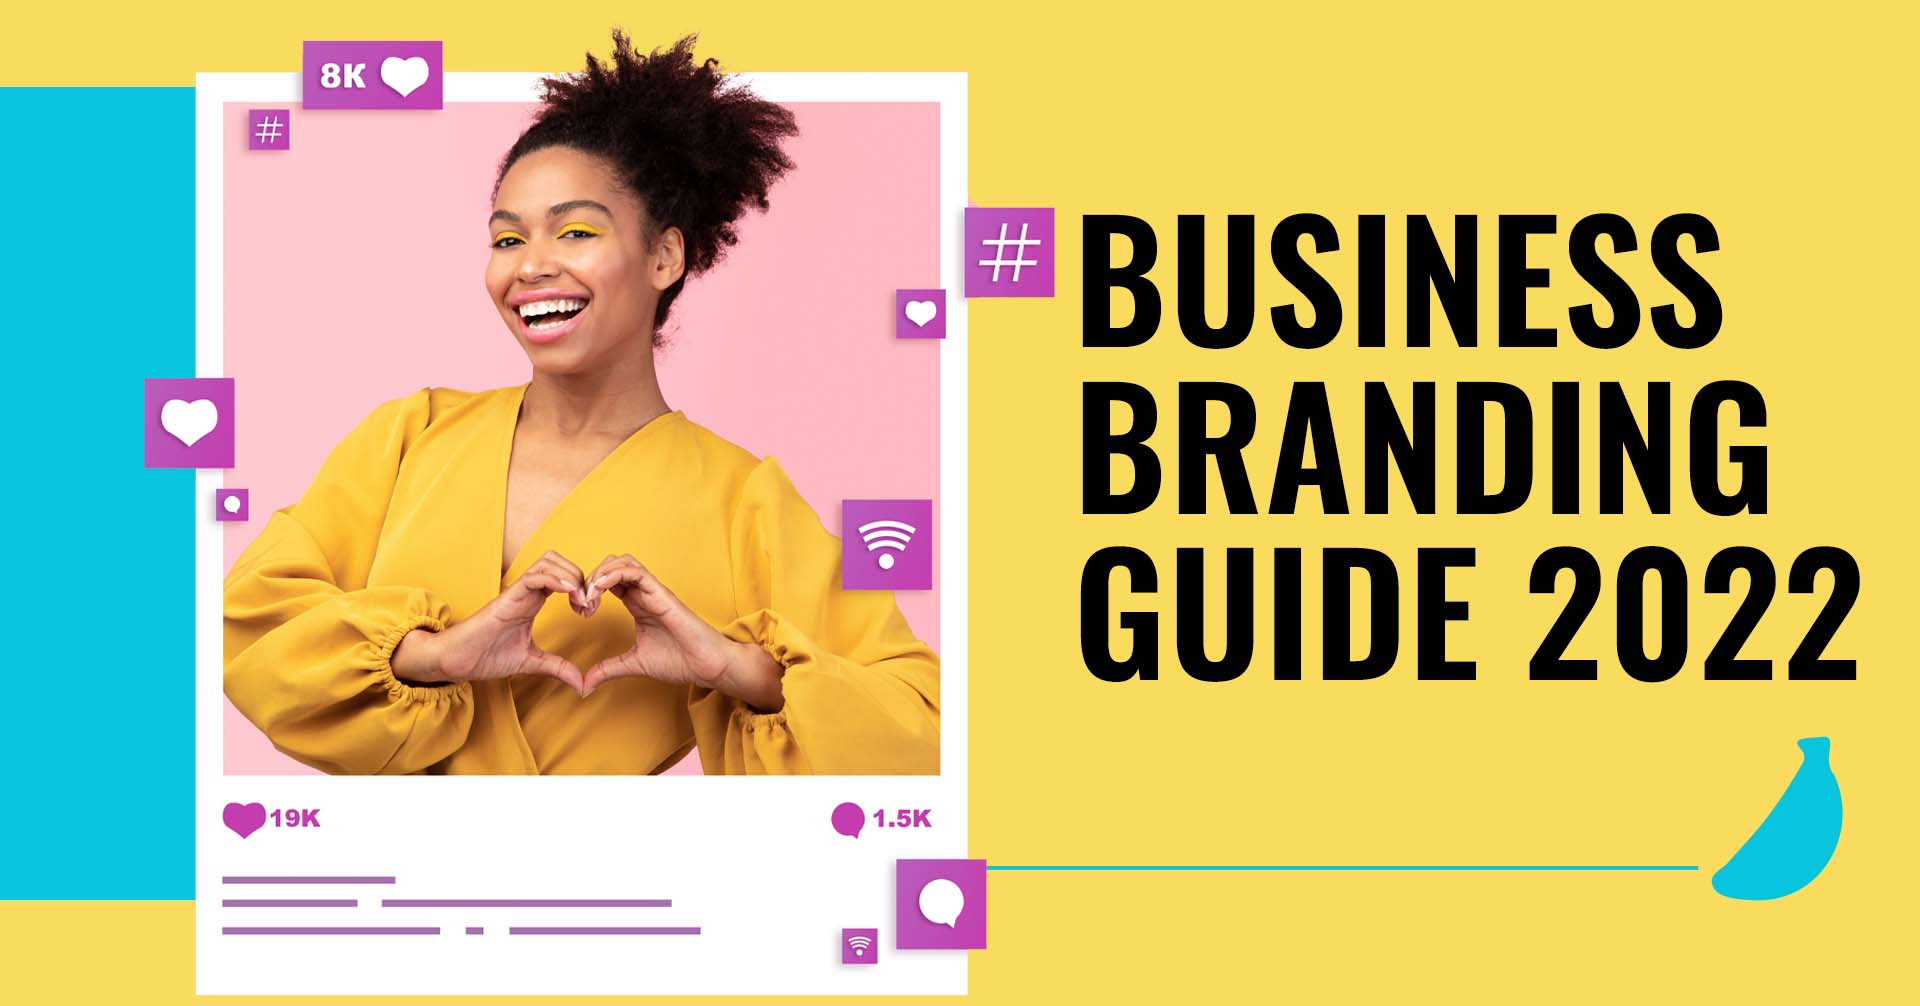 The best business branding guide